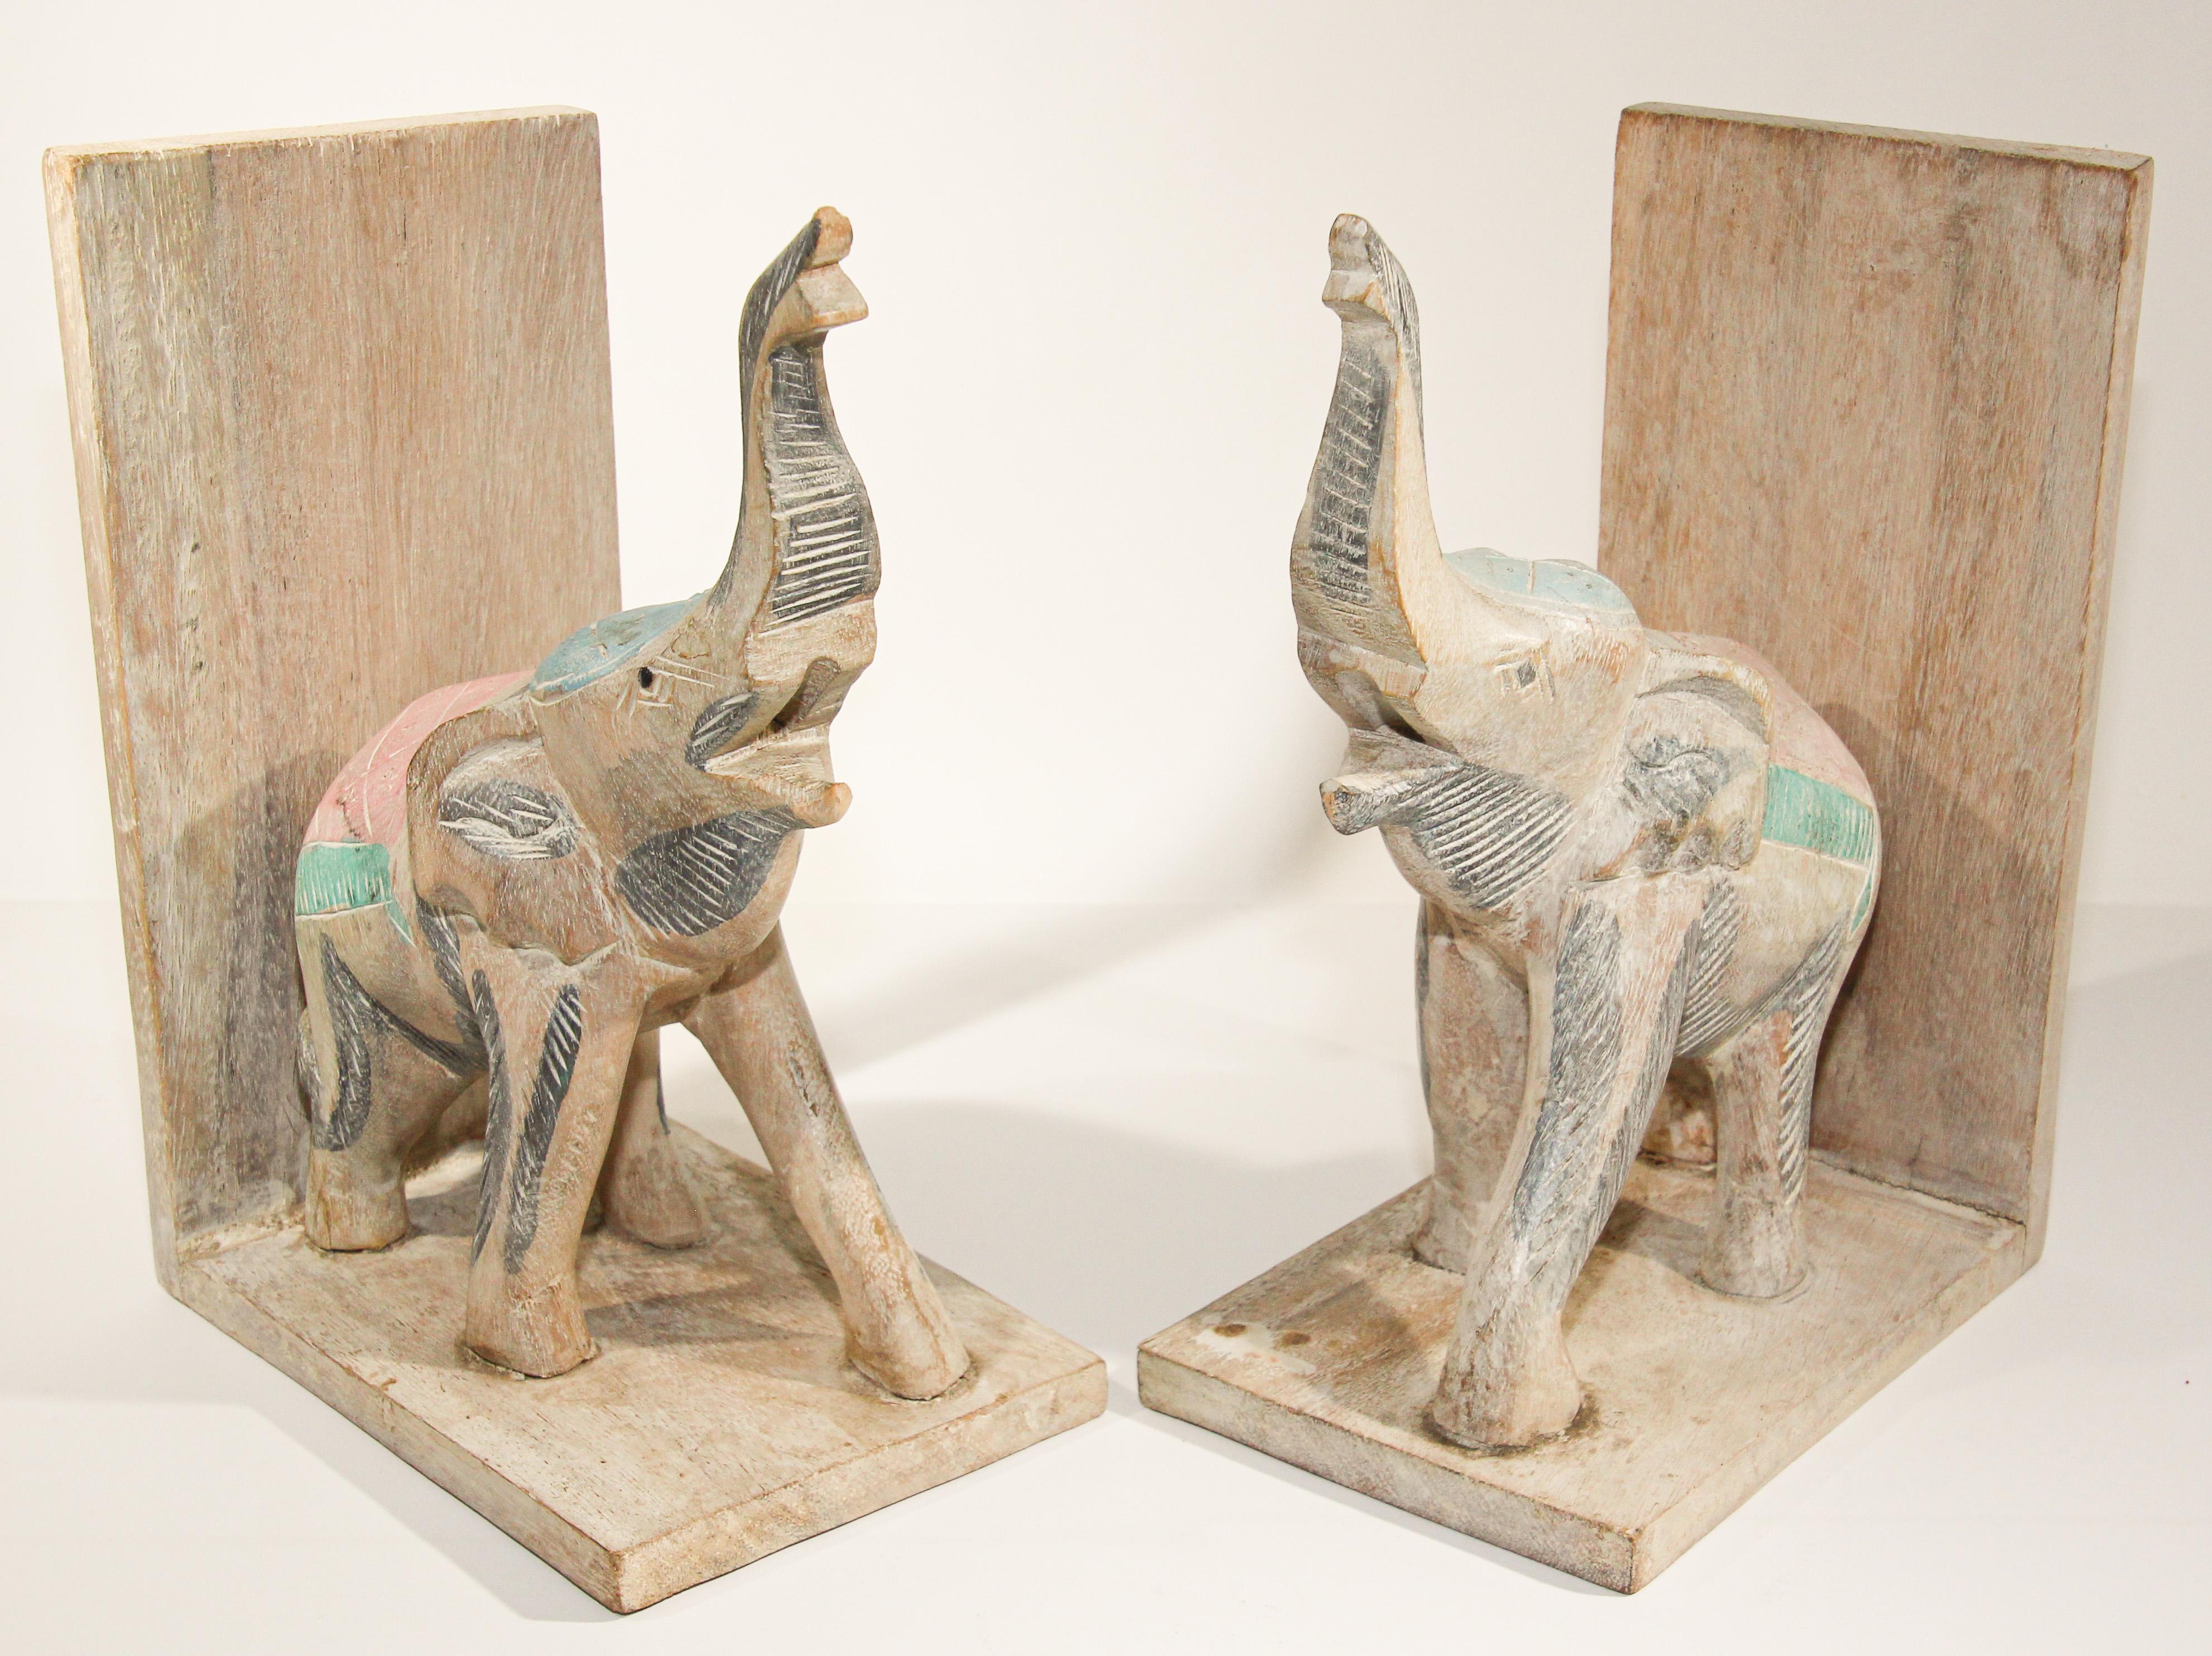 Anglo Raj Hand Carved Wooden Elephant Bookends For Sale